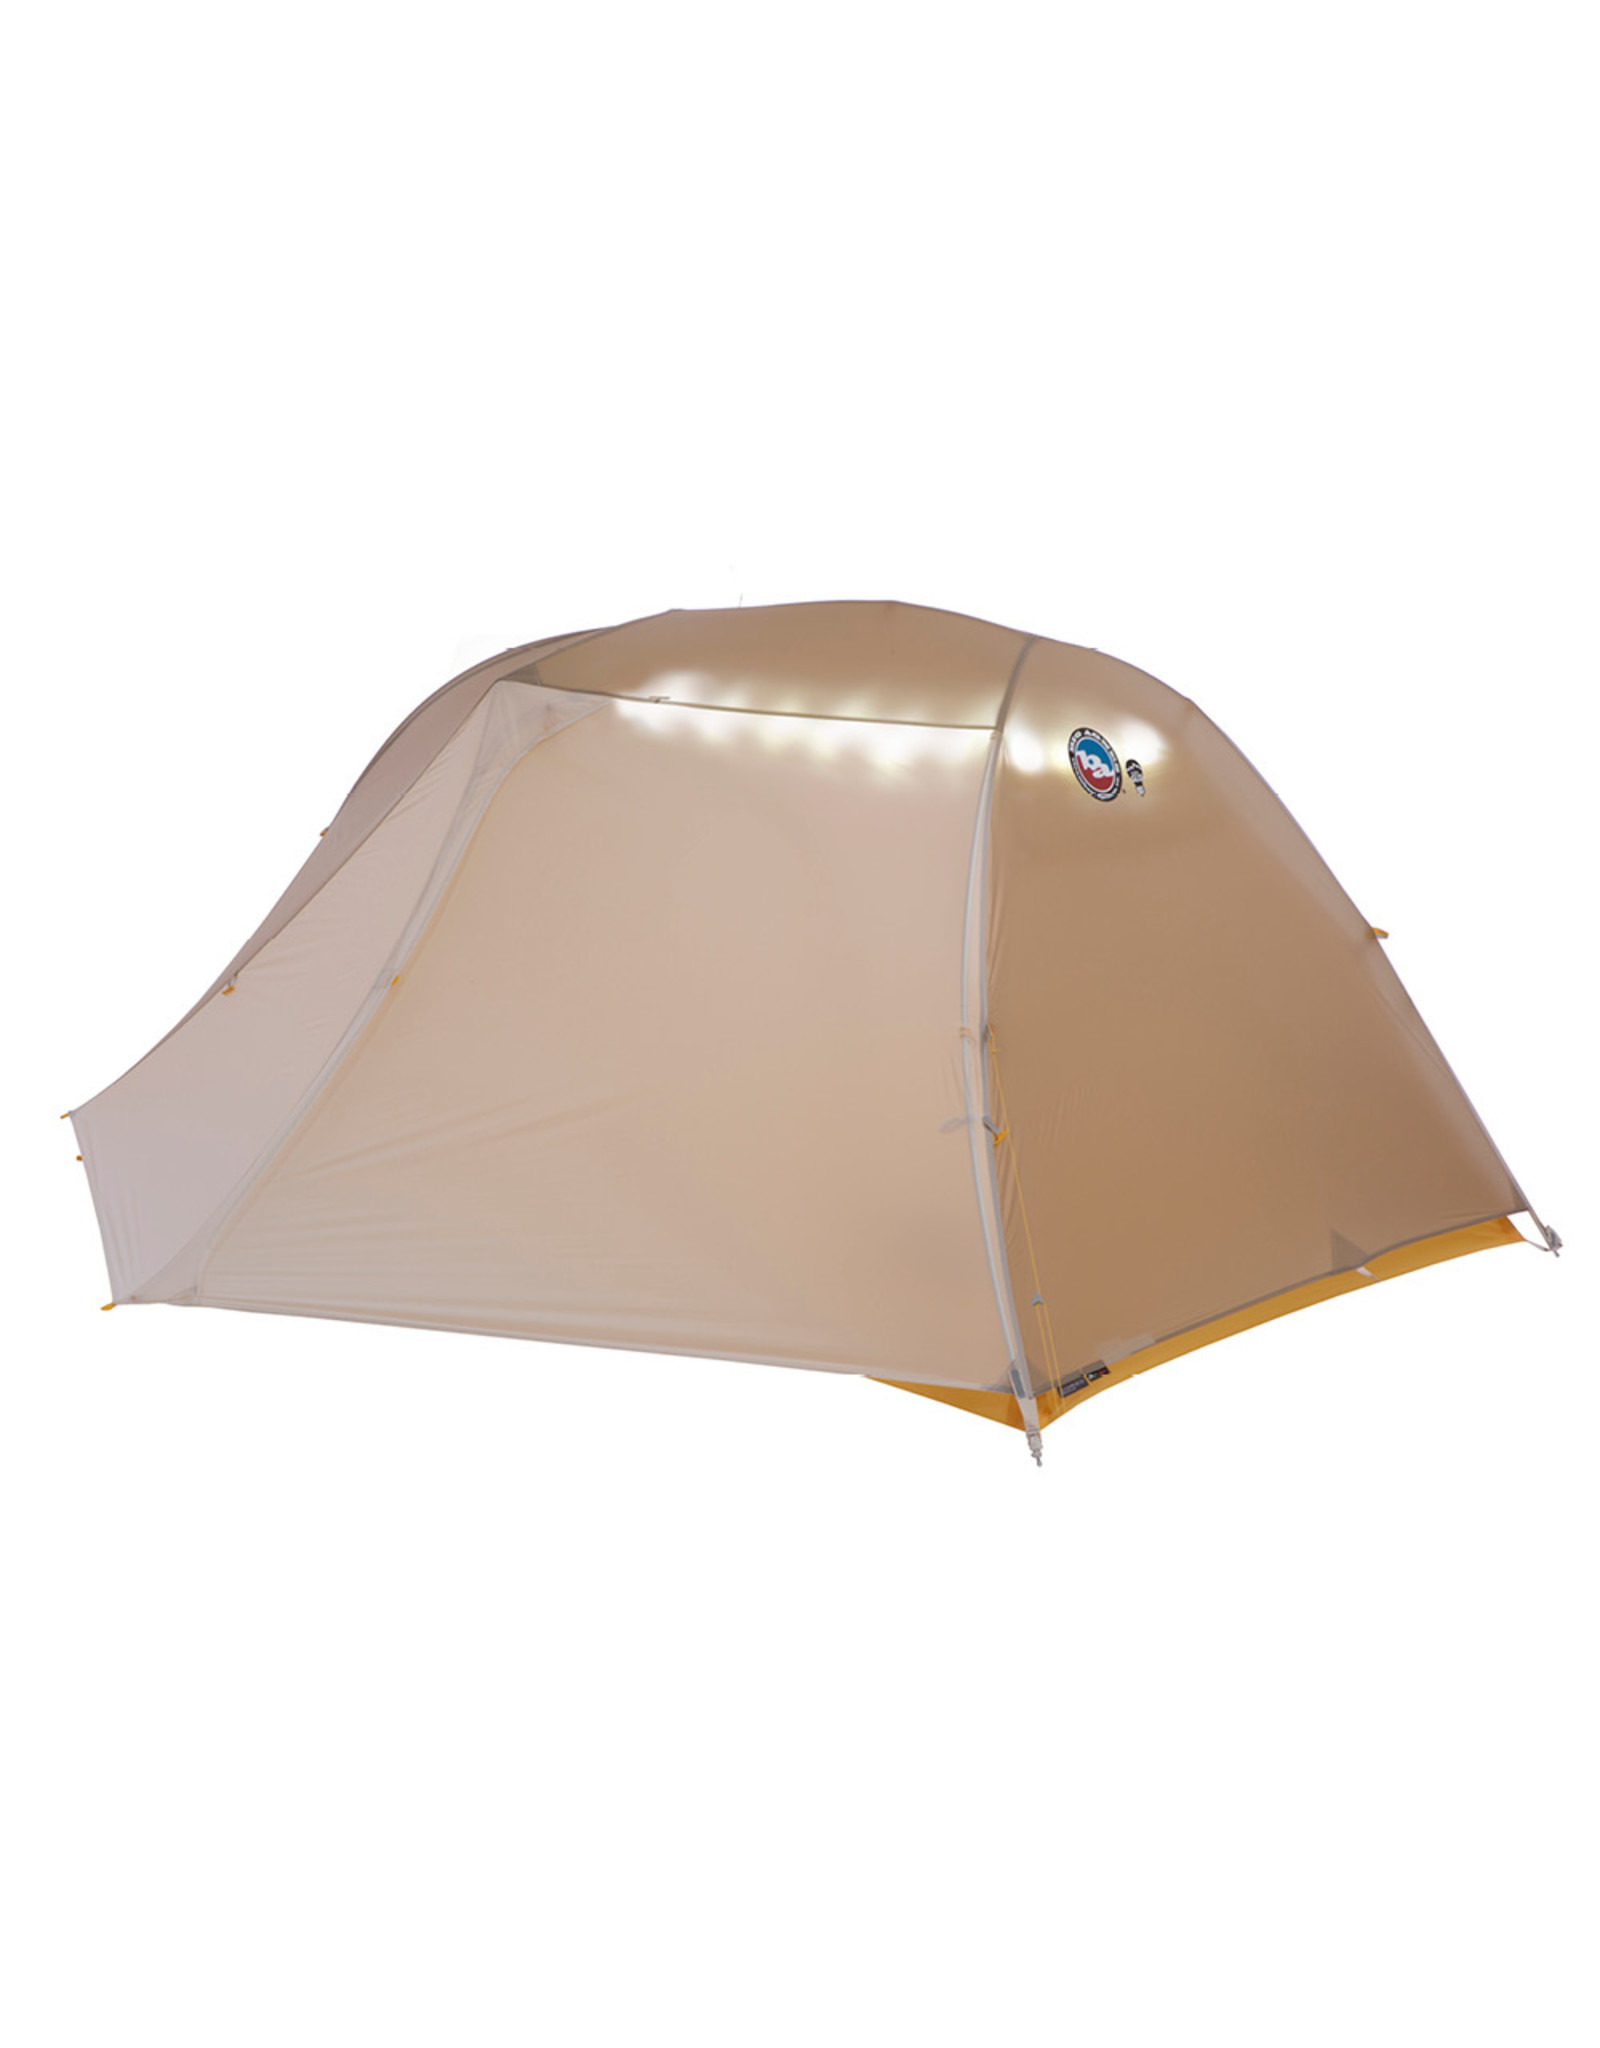 Big Agnes Tiger Wall UL2 mtnGLO Solution Dye - Gray/Yellow